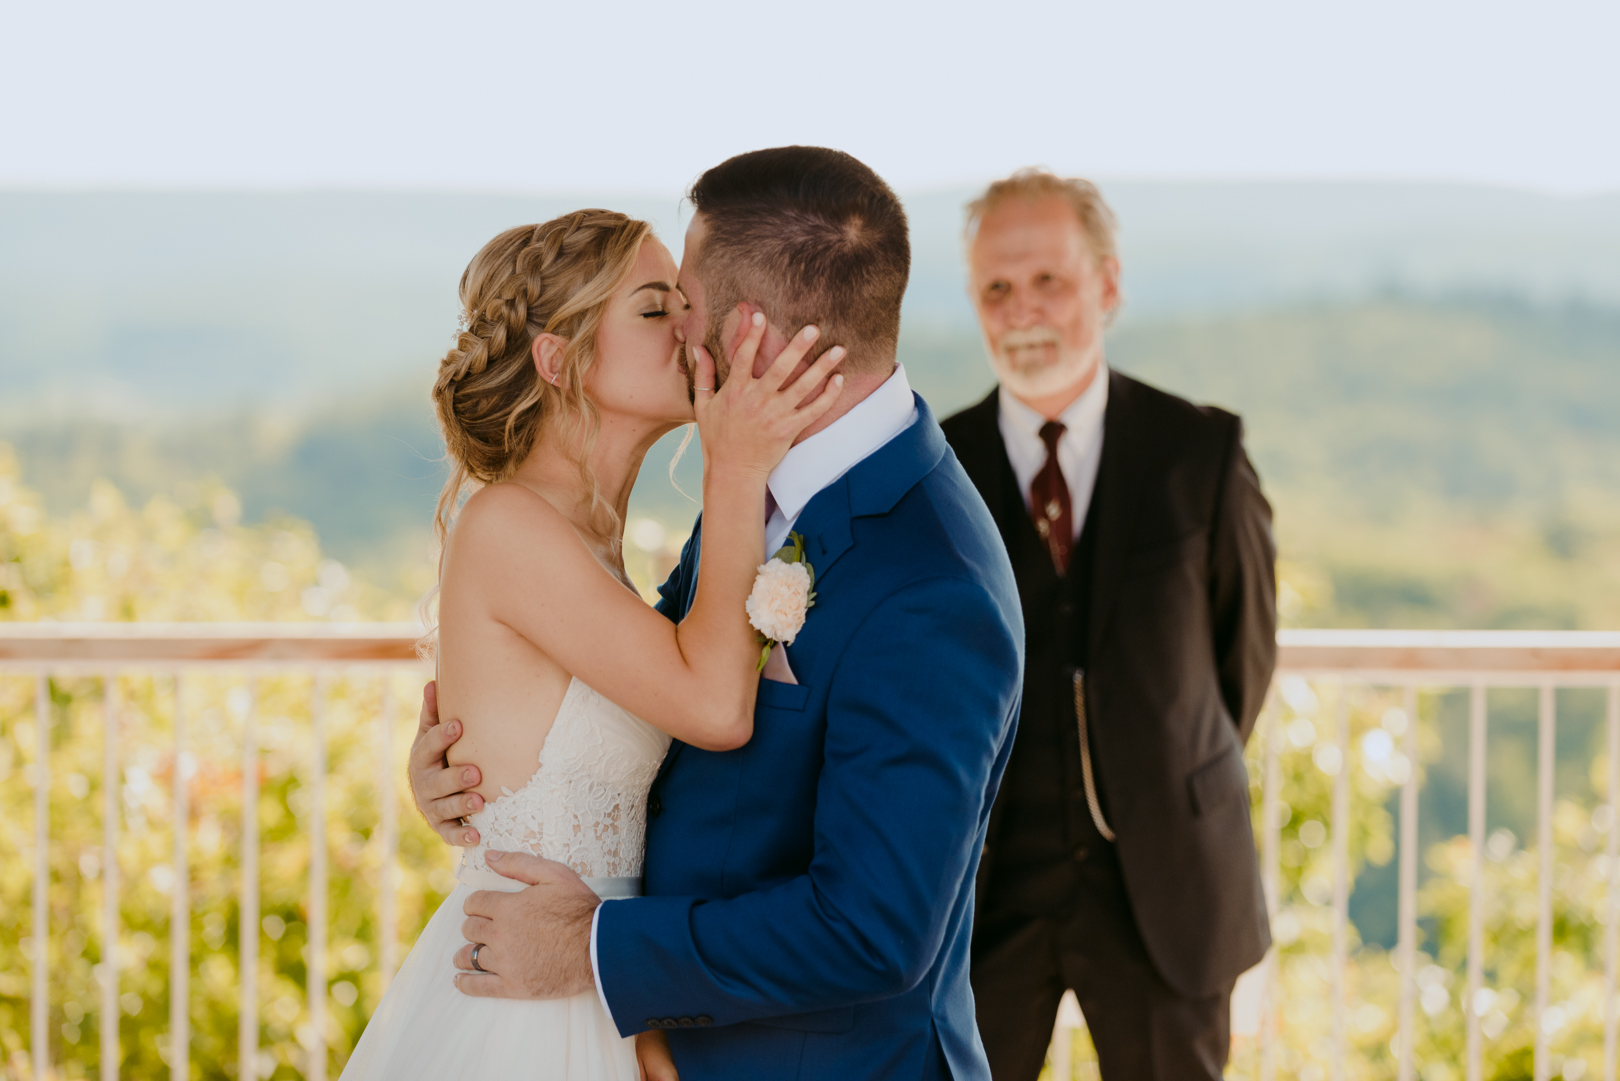 bride and groom first kiss during outdoor wedding ceremony at le belvedere